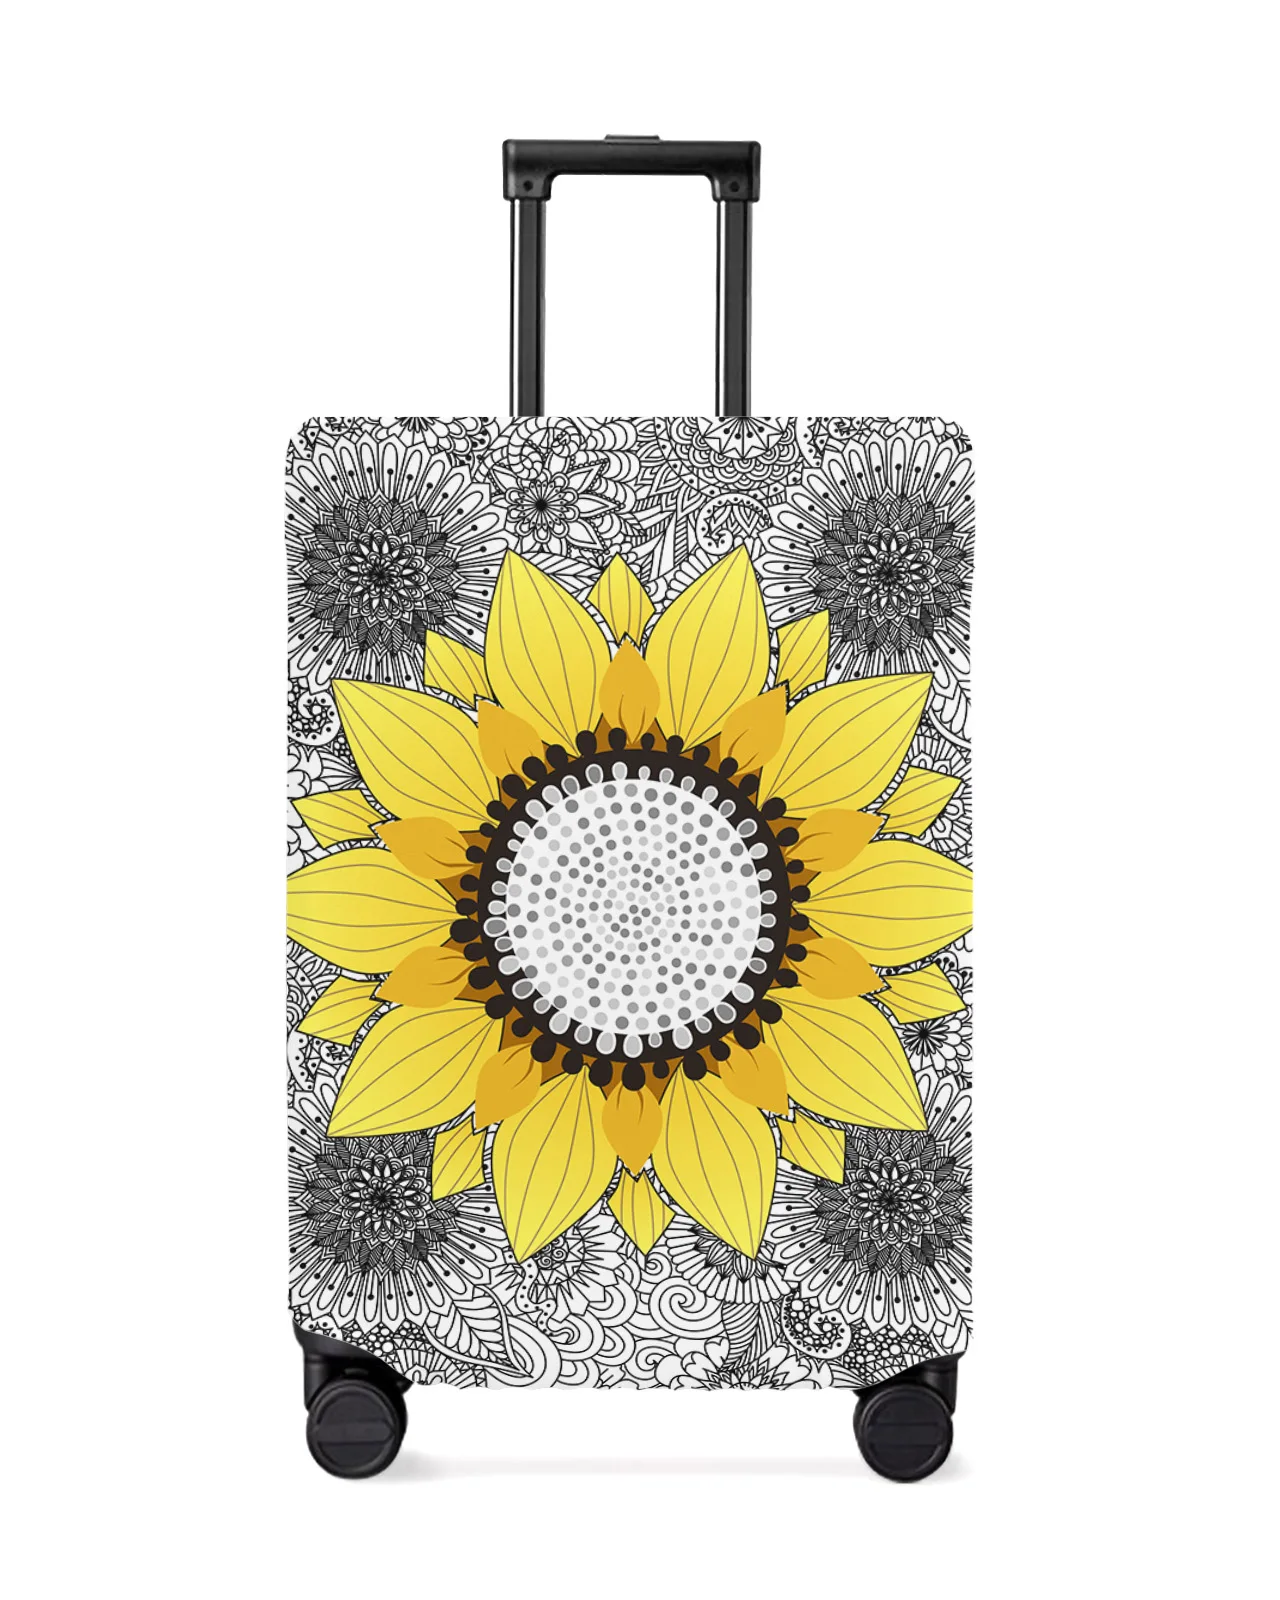 sunflower-mandala-black-white-travel-luggage-protective-cover-for-travel-accessories-suitcase-elastic-dust-case-protect-sleeve